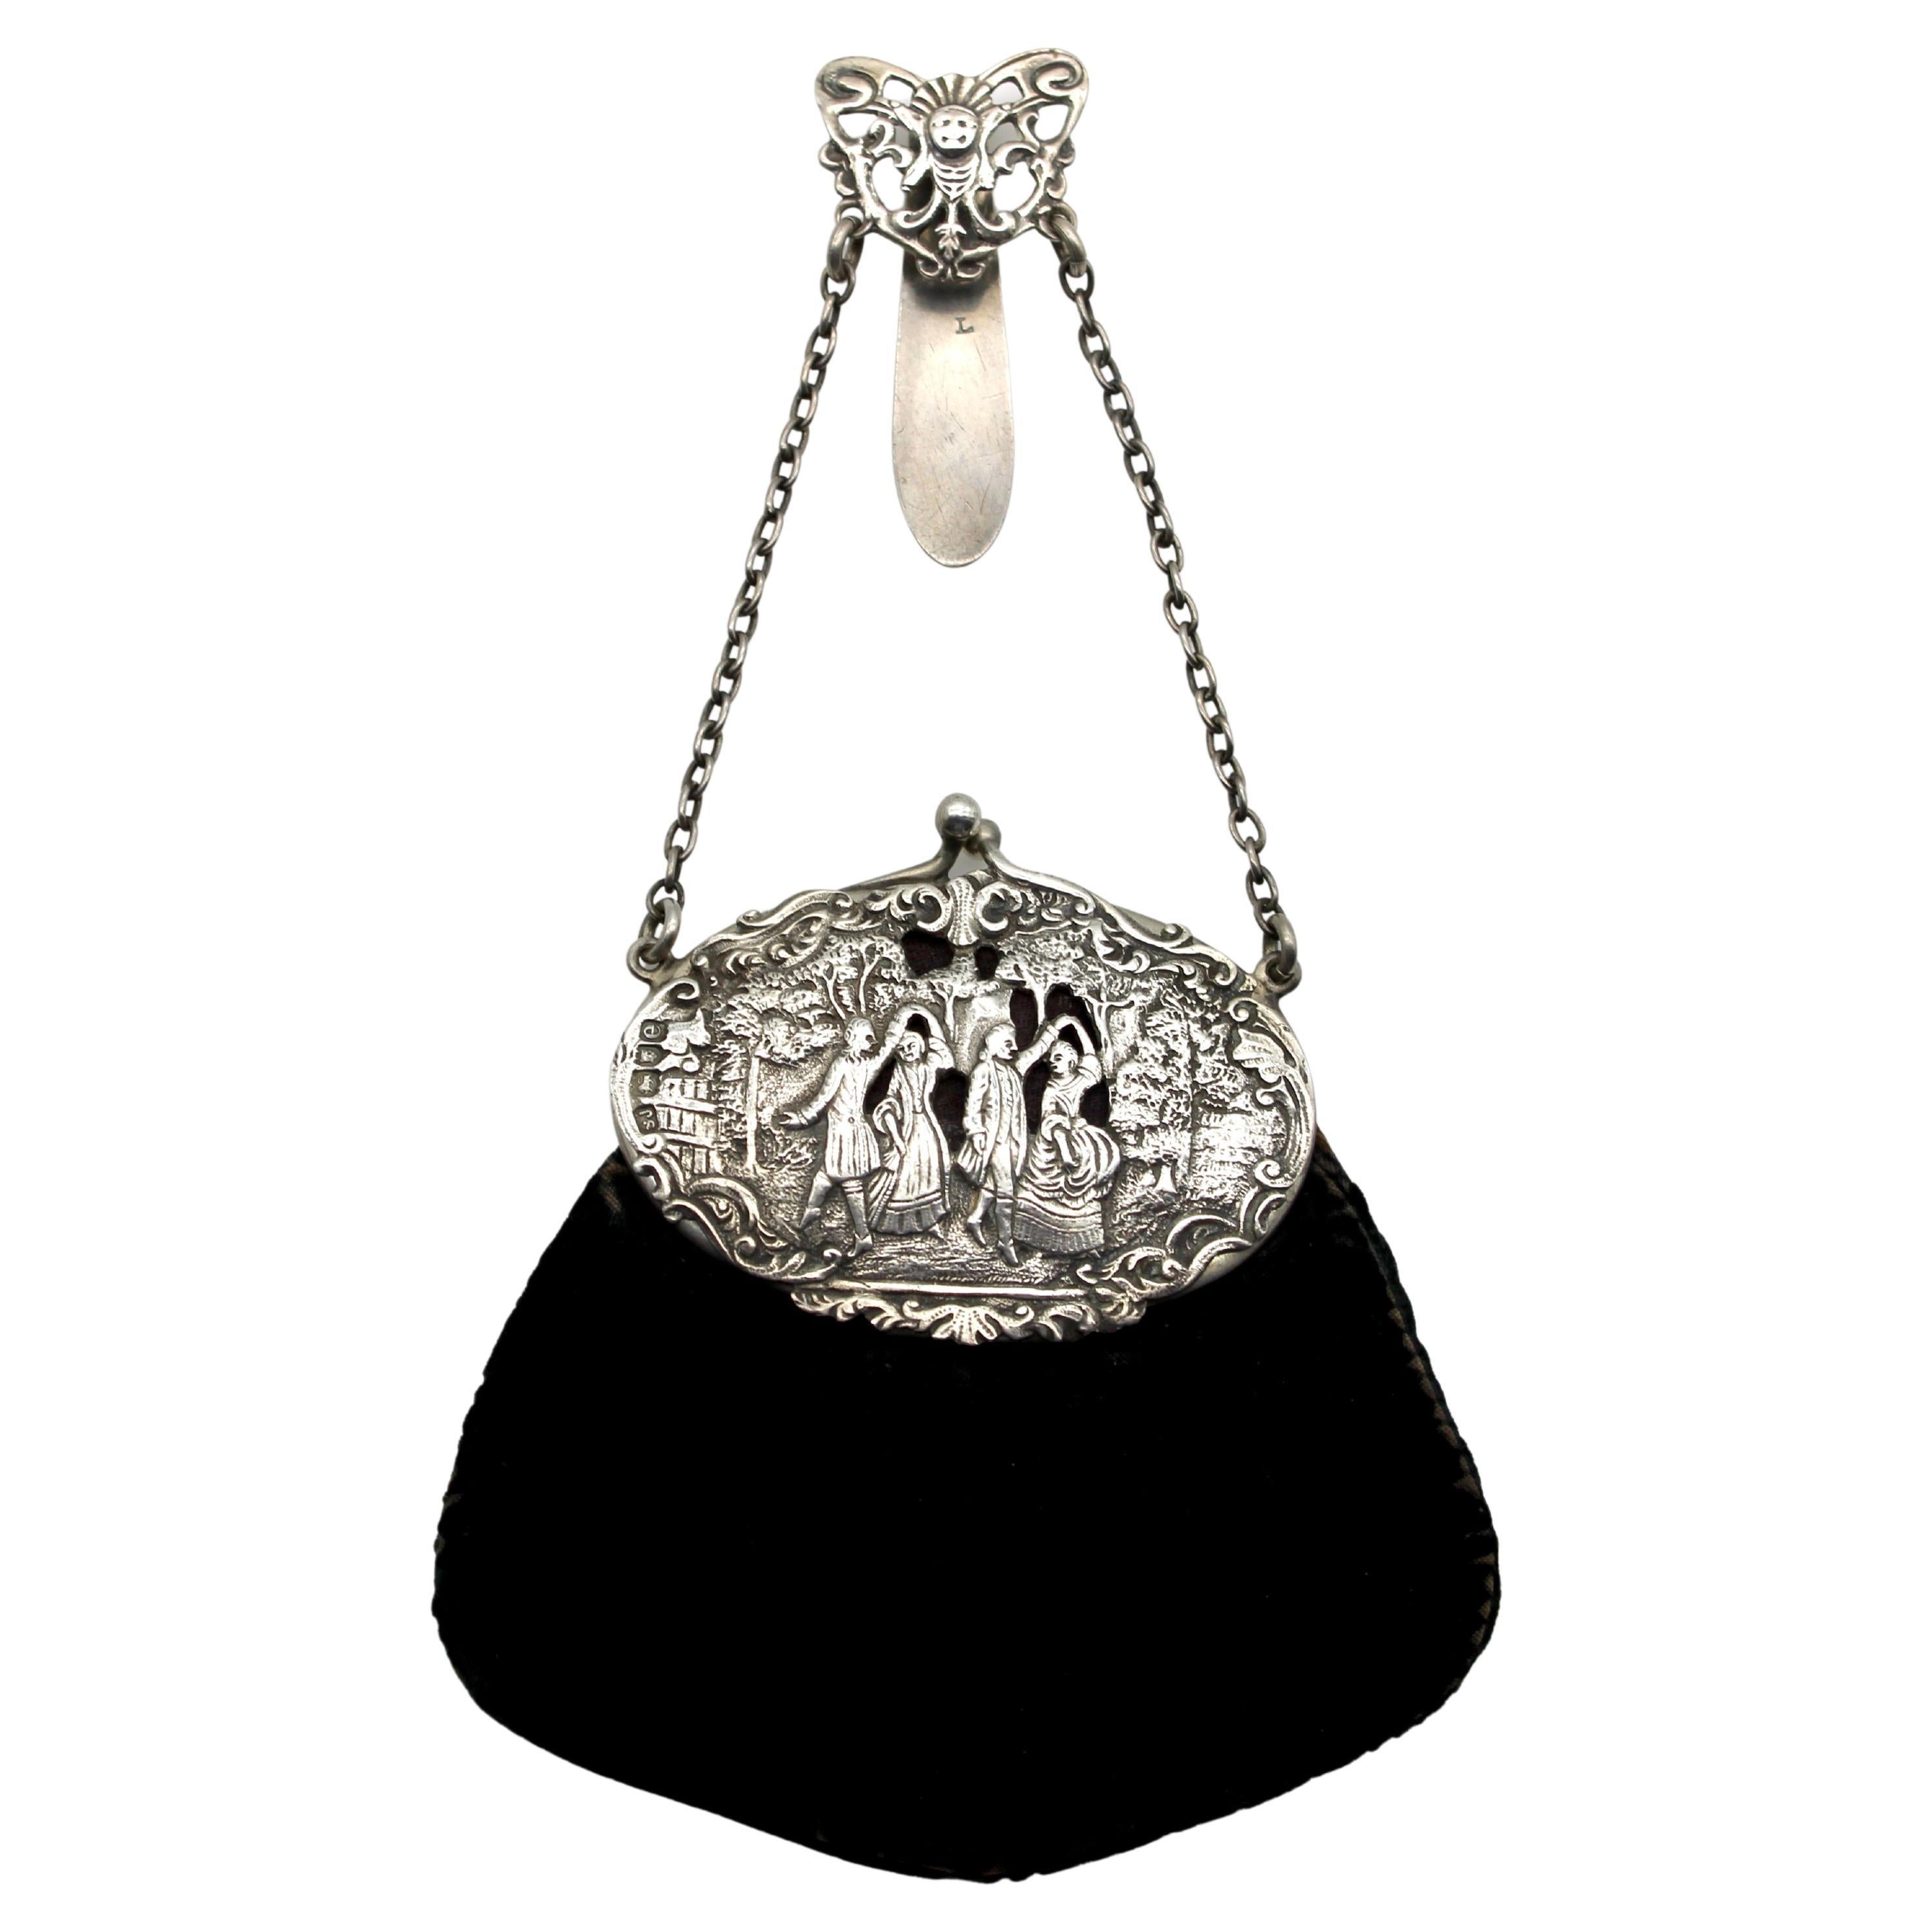 Sterling Silver Evening Bag or Purse, circa 1900 London by Samuel Jacob For Sale